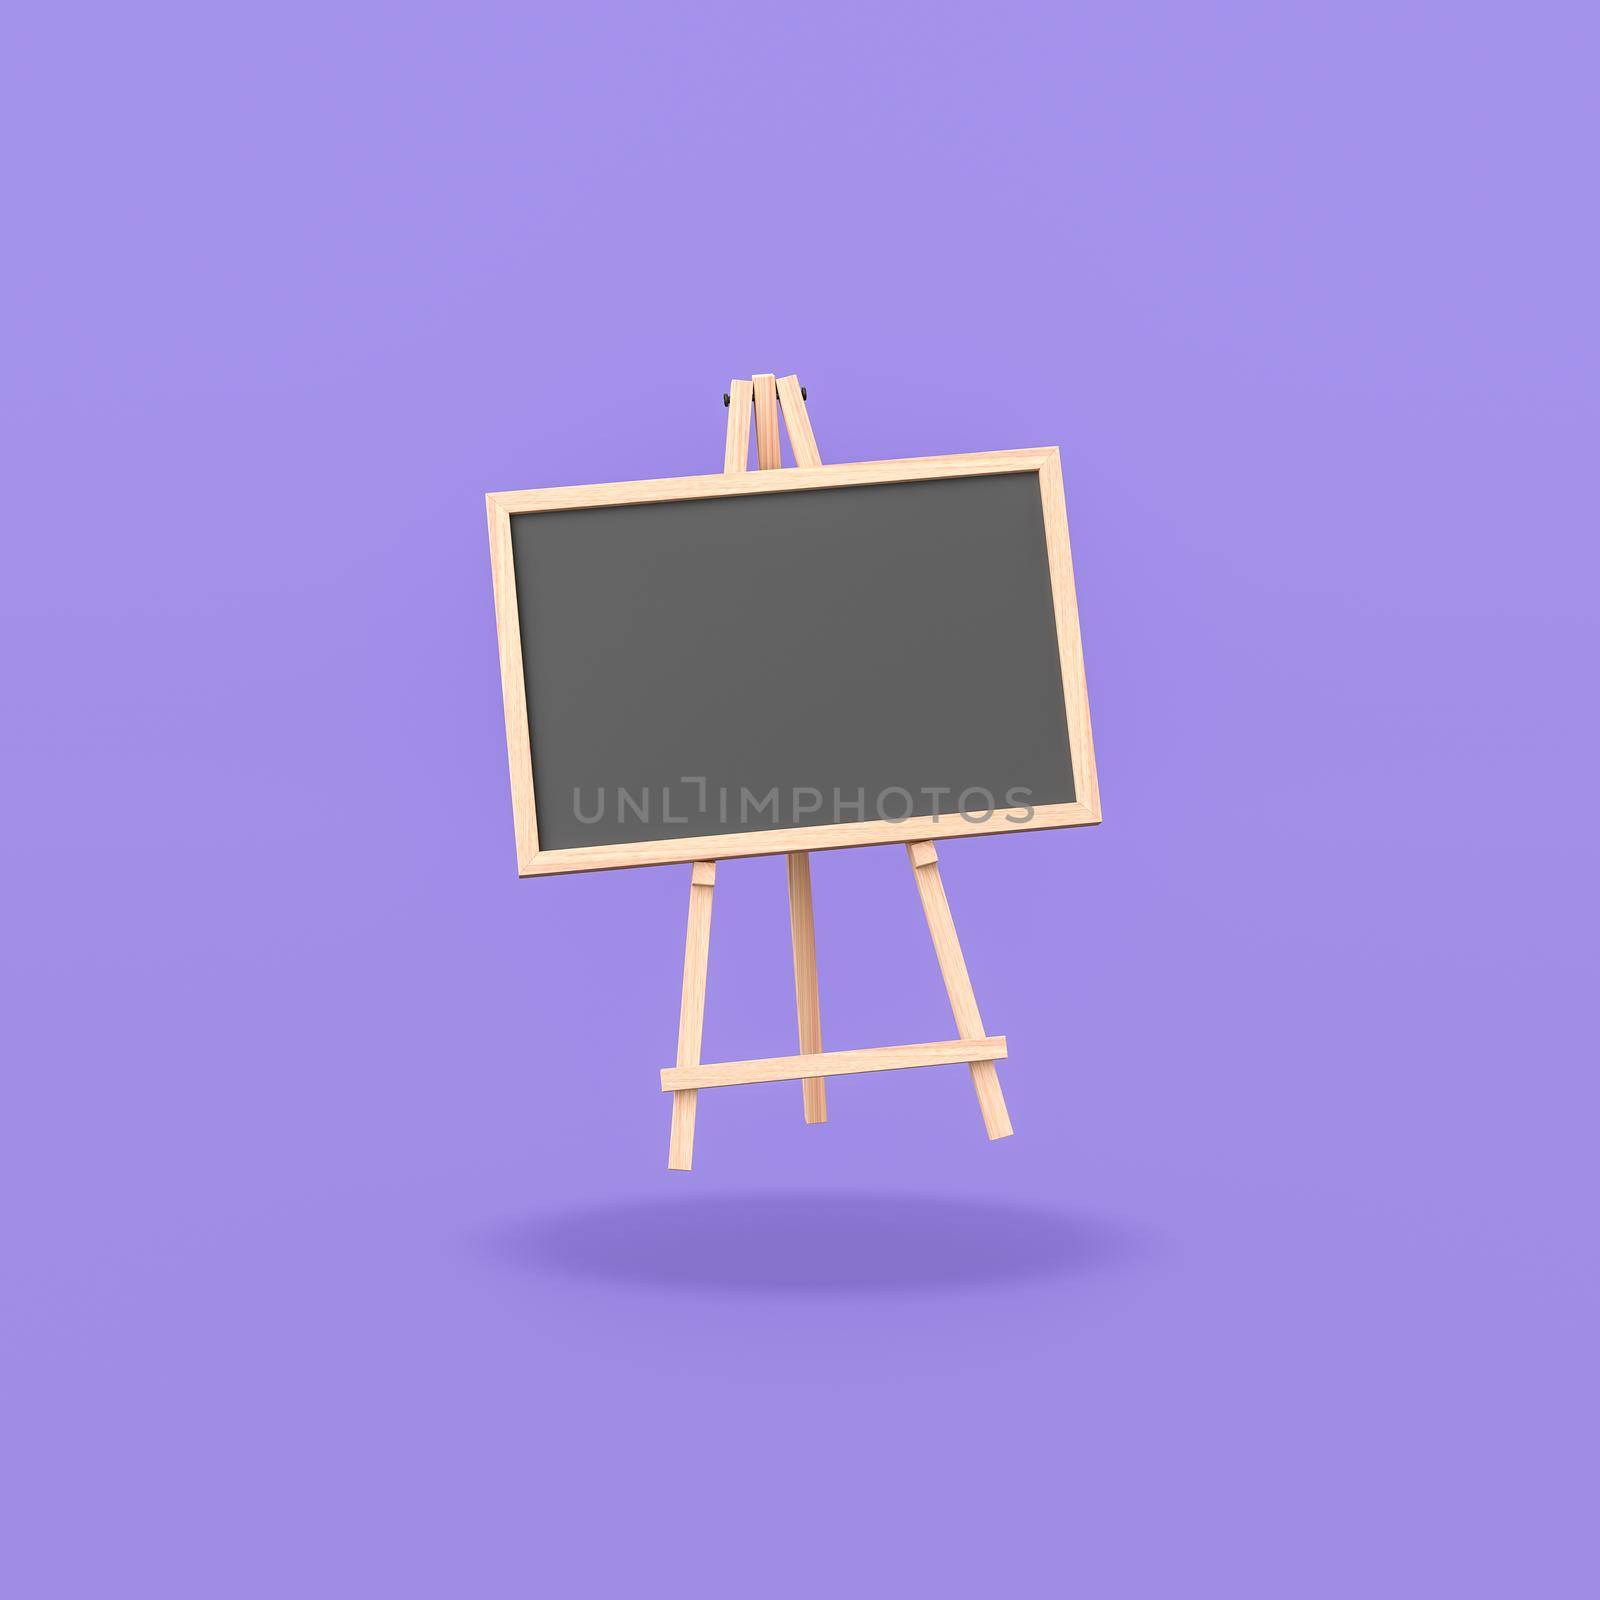 Blank Blackboard on Wooden Easel Isolated on Flat Purple Background with Shadow 3D Illustration